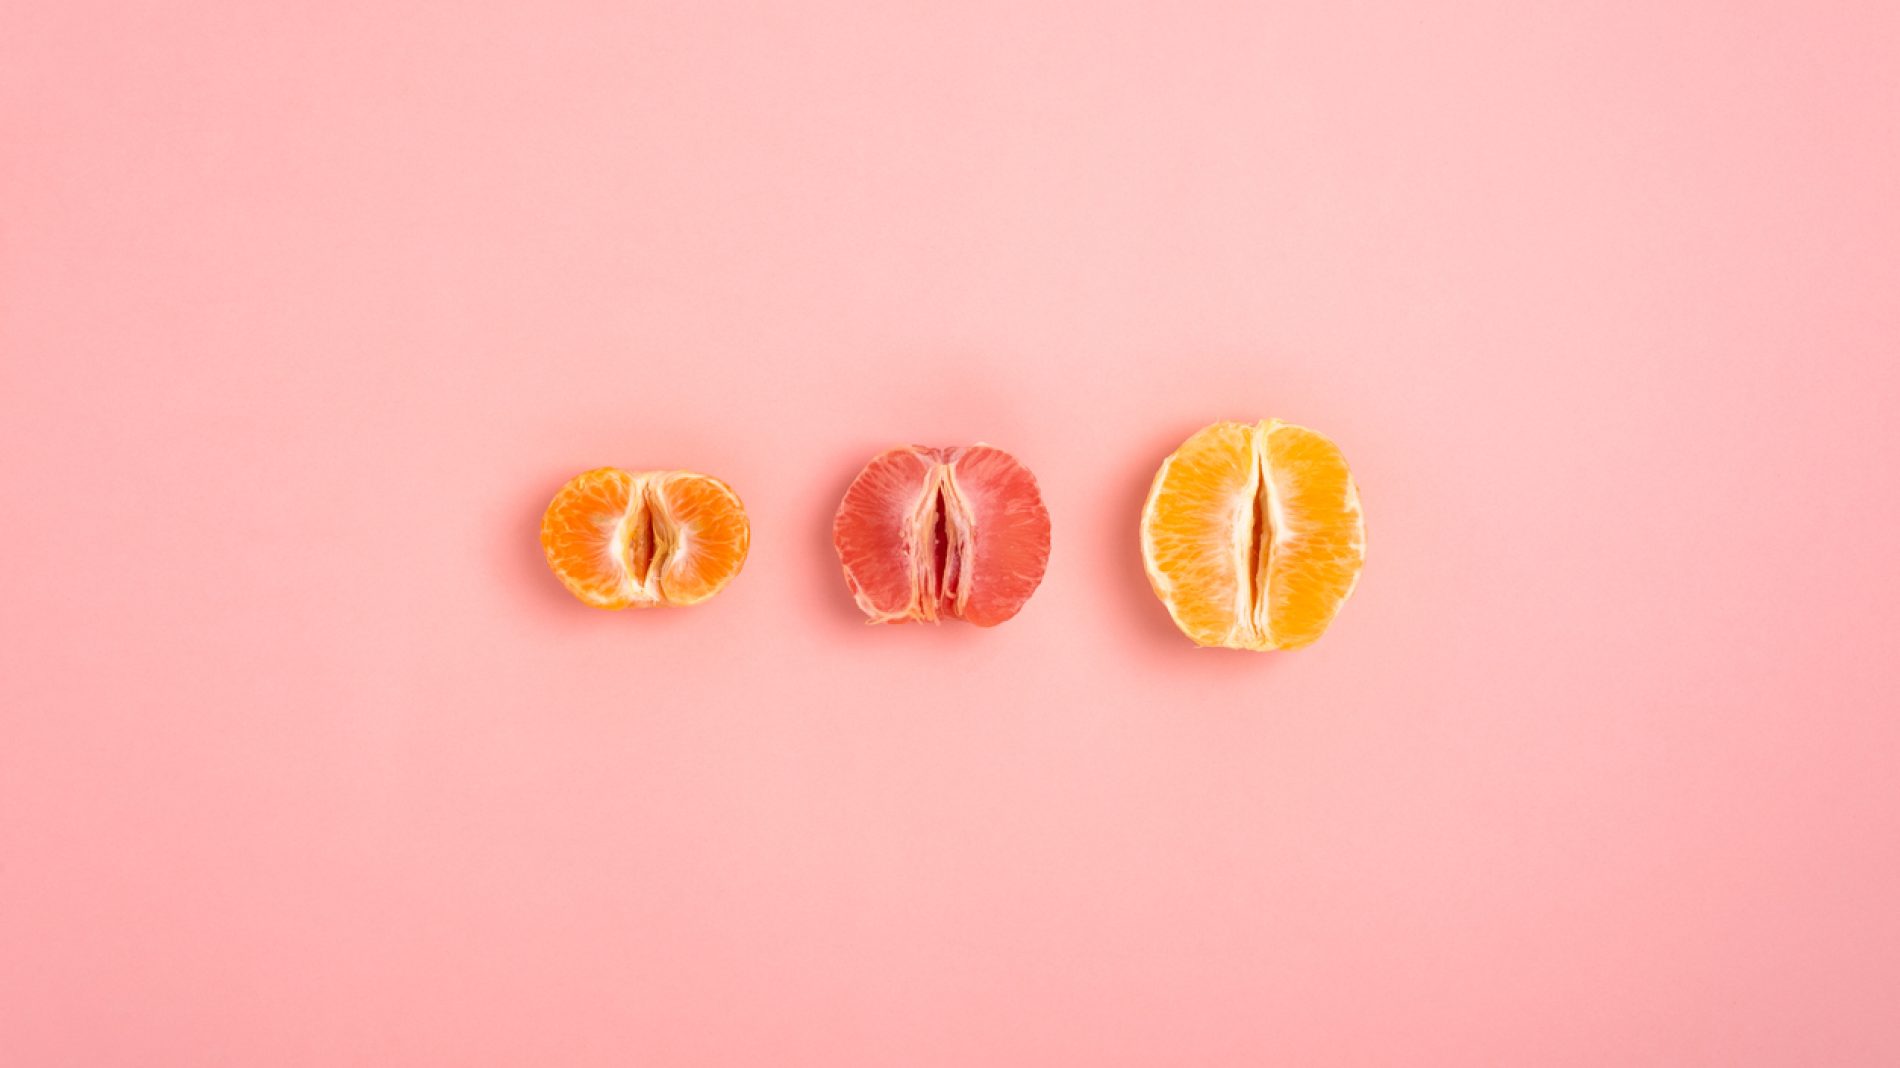 tangerine, grapefruit and orange cut in half on a peach background as a symbol of the vagina and female fertility, no people